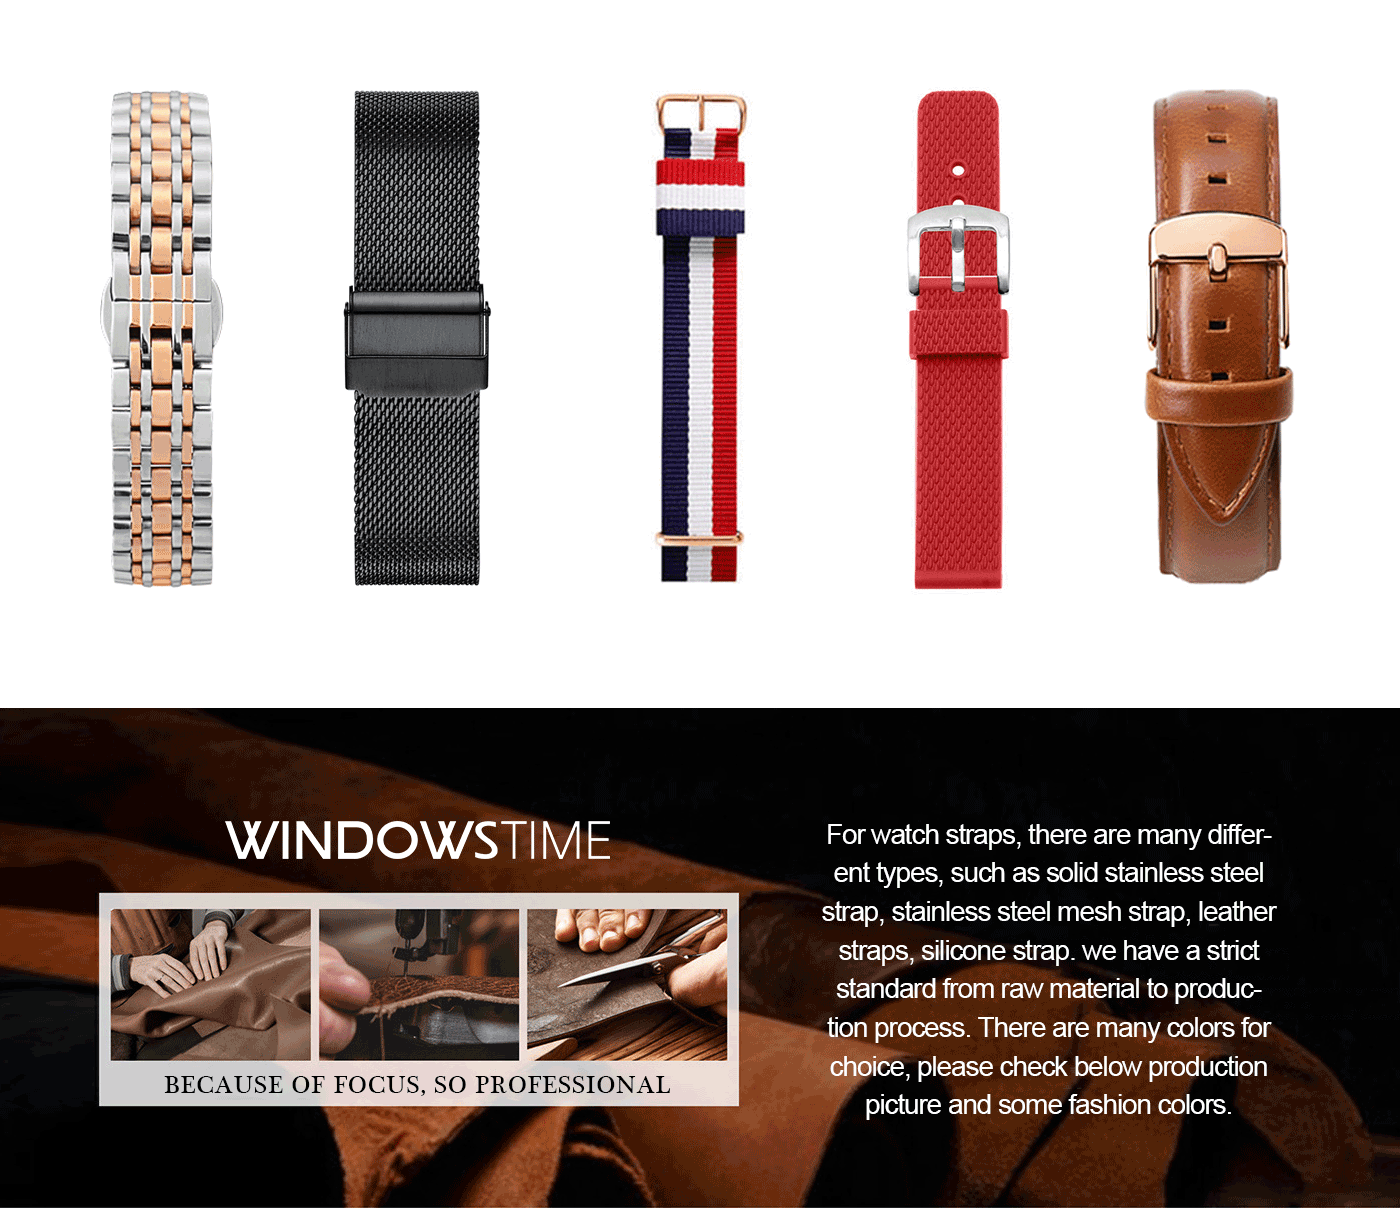 What are the materials of watch straps?